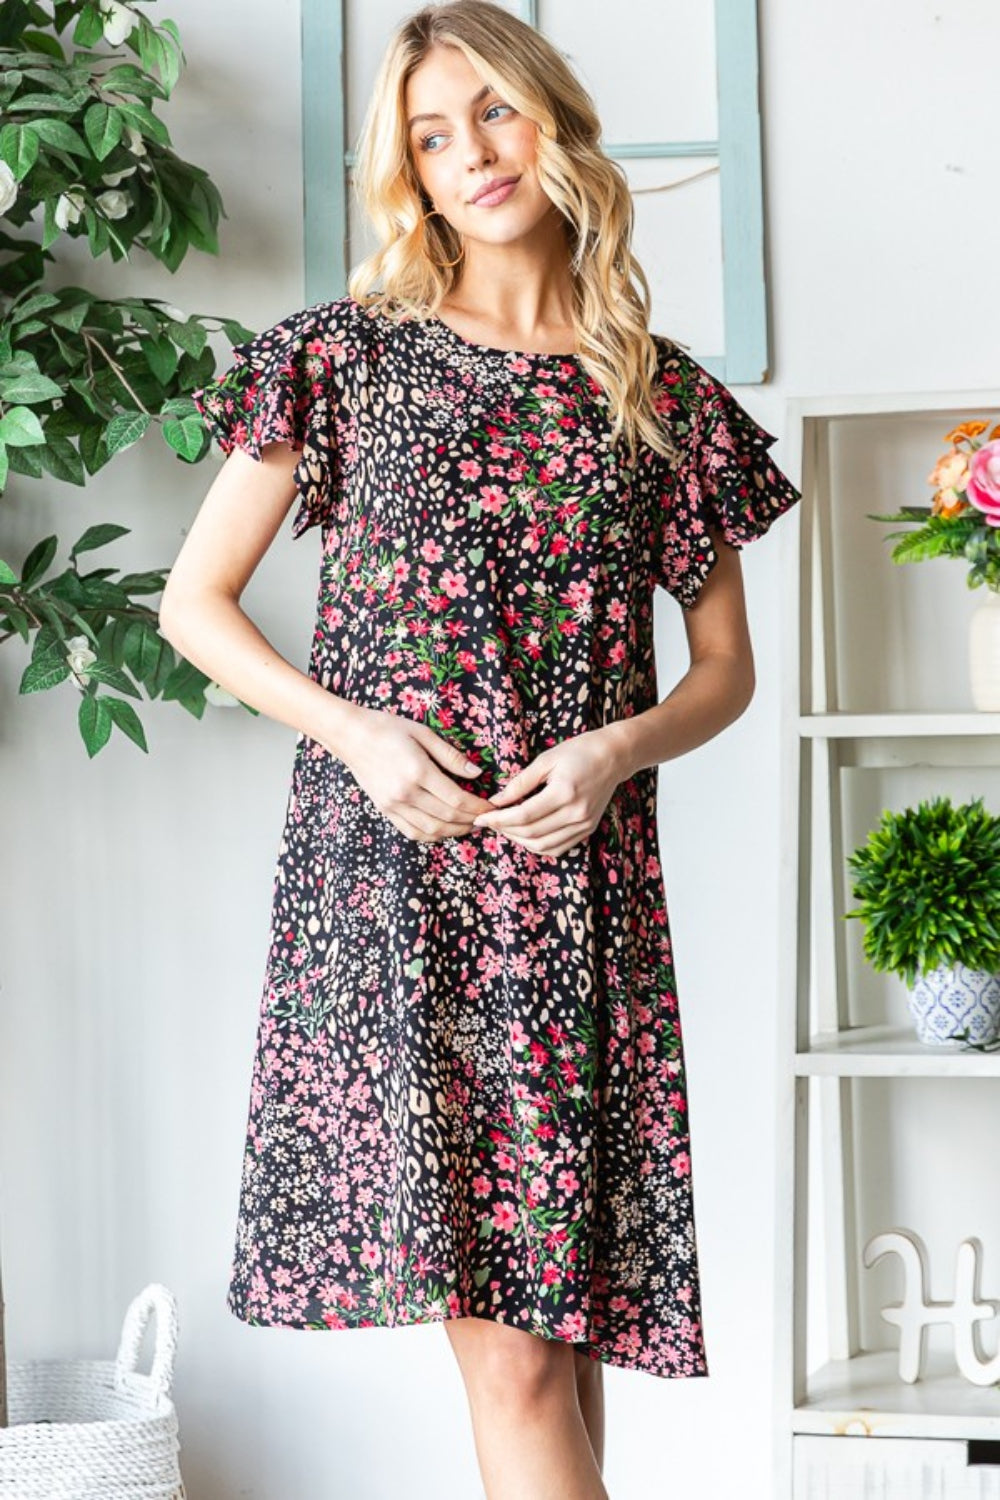 Get ready to turn heads in this stunning Printed Ruffled Short Sleeve Dress. With its eye-catching print and playful ruffled sleeves, this dress exudes feminine charm. The best part? It comes with pockets, adding a practical touch to this stylish piece. S  -3X